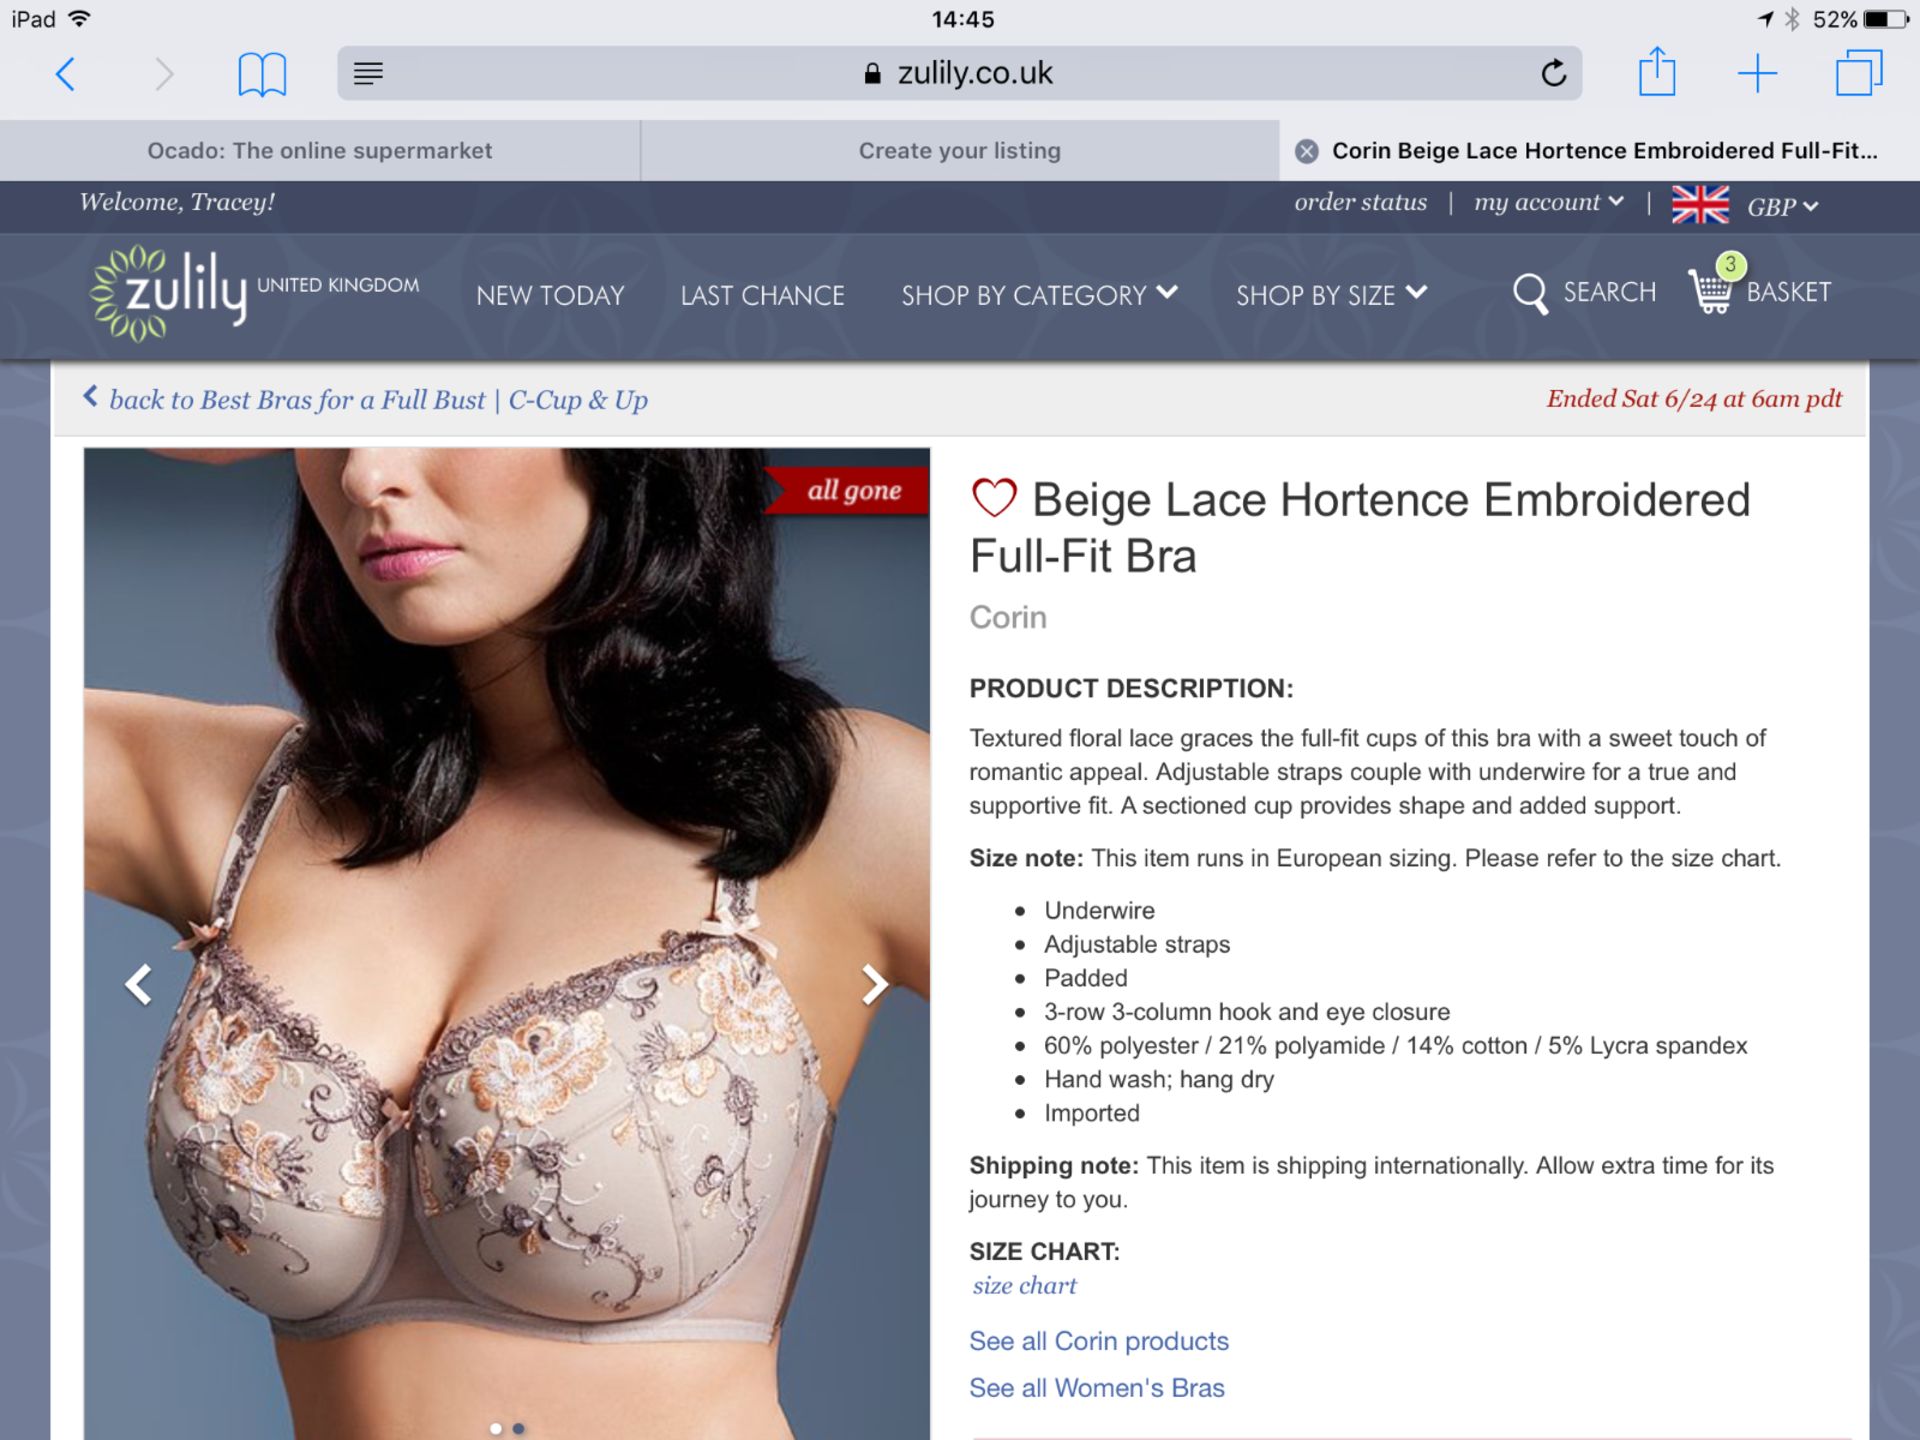 Corina Beige Lace Hortence Embroidered Full-Fit Bra, Size 38 Ddd F, Rrp 58.99 (New With Tags) [ - Image 3 of 4